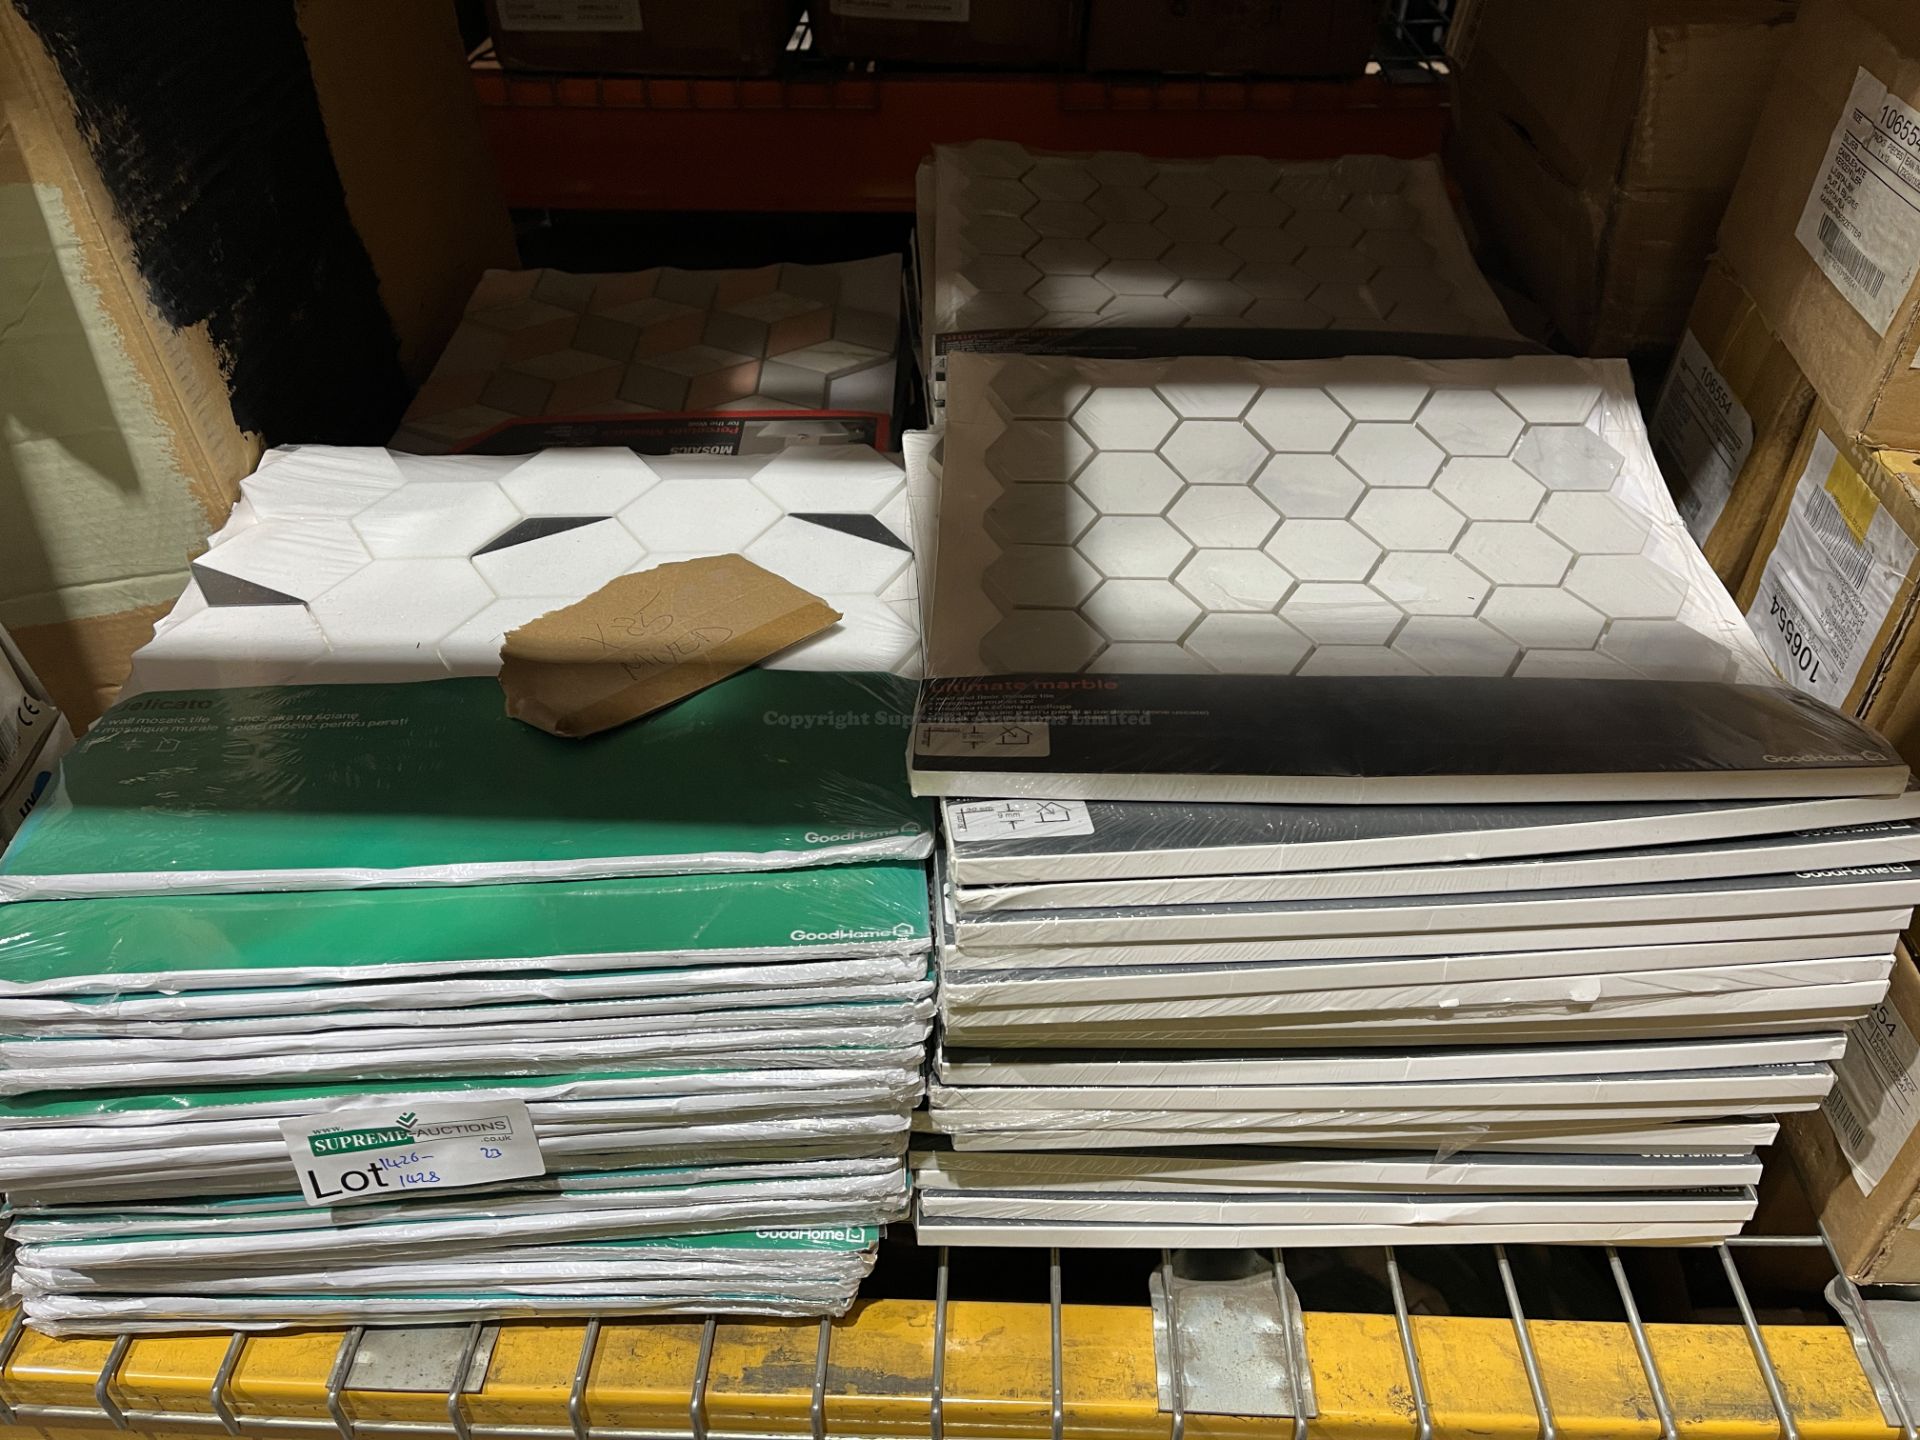 30 X BRAND NEW MOSAIC TILE SHEETS IN VARIOUS DESIGNS R9-10